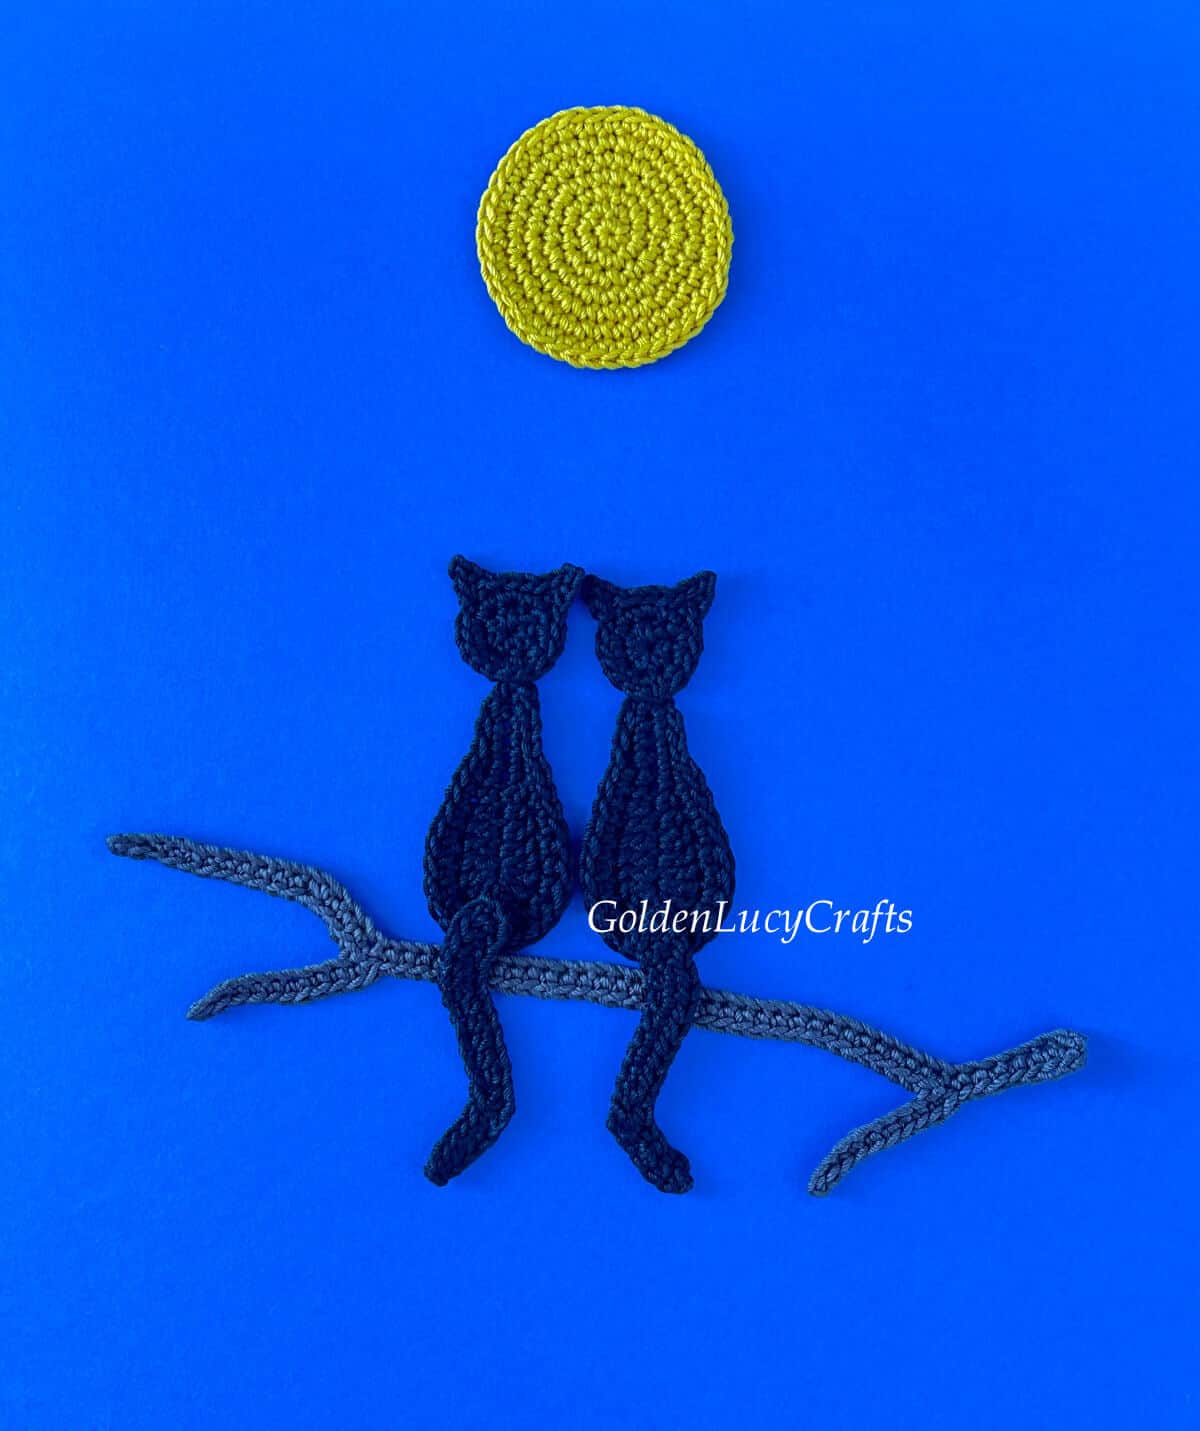 Crocheted two black cats sitting on a tree branch under a full moon on dark blue background.